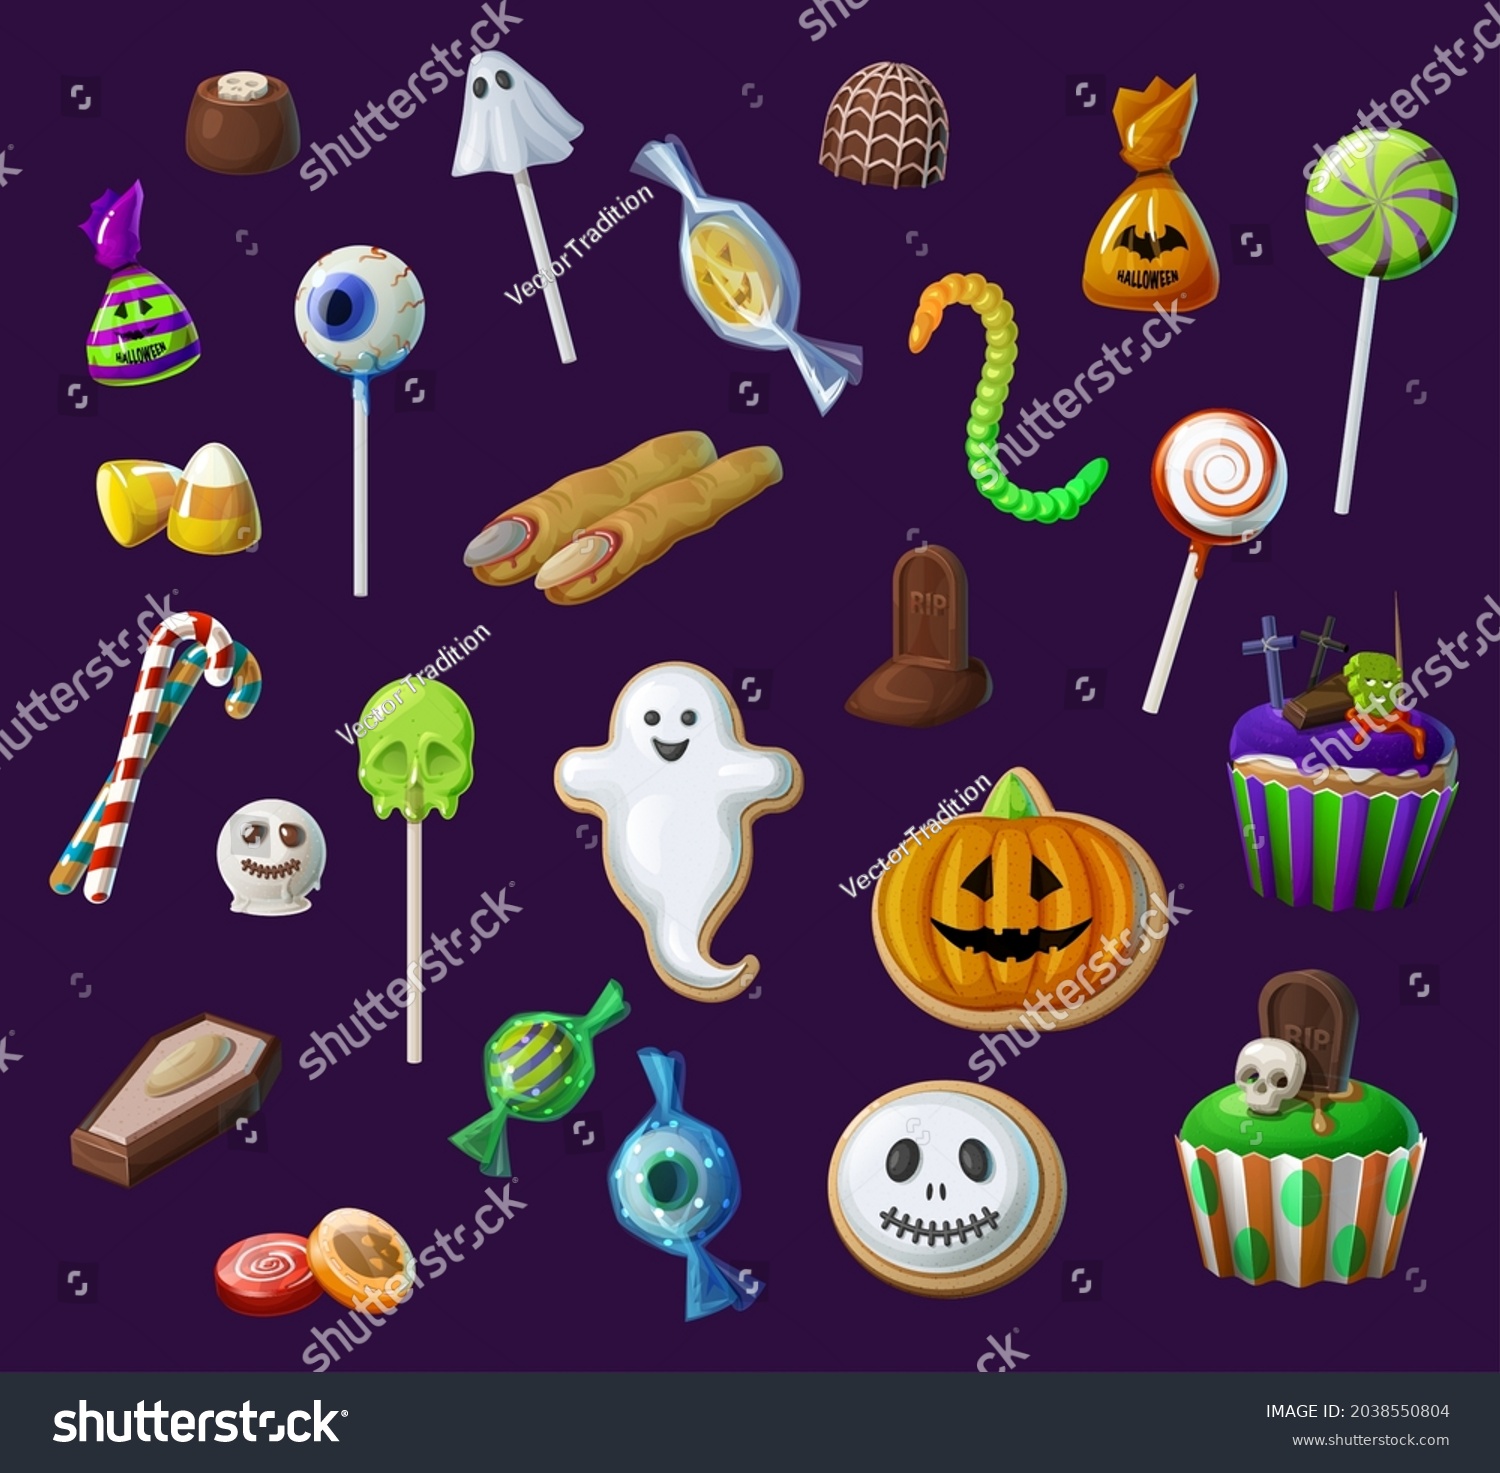 SVG of Halloween sweets, lollypops and candies, cupcakes, candy corn and witch fingers. Halloween creepy treats set, scary chocolate candies and cookies with skull, ghost and pumpkin, eye, worm and grave, svg